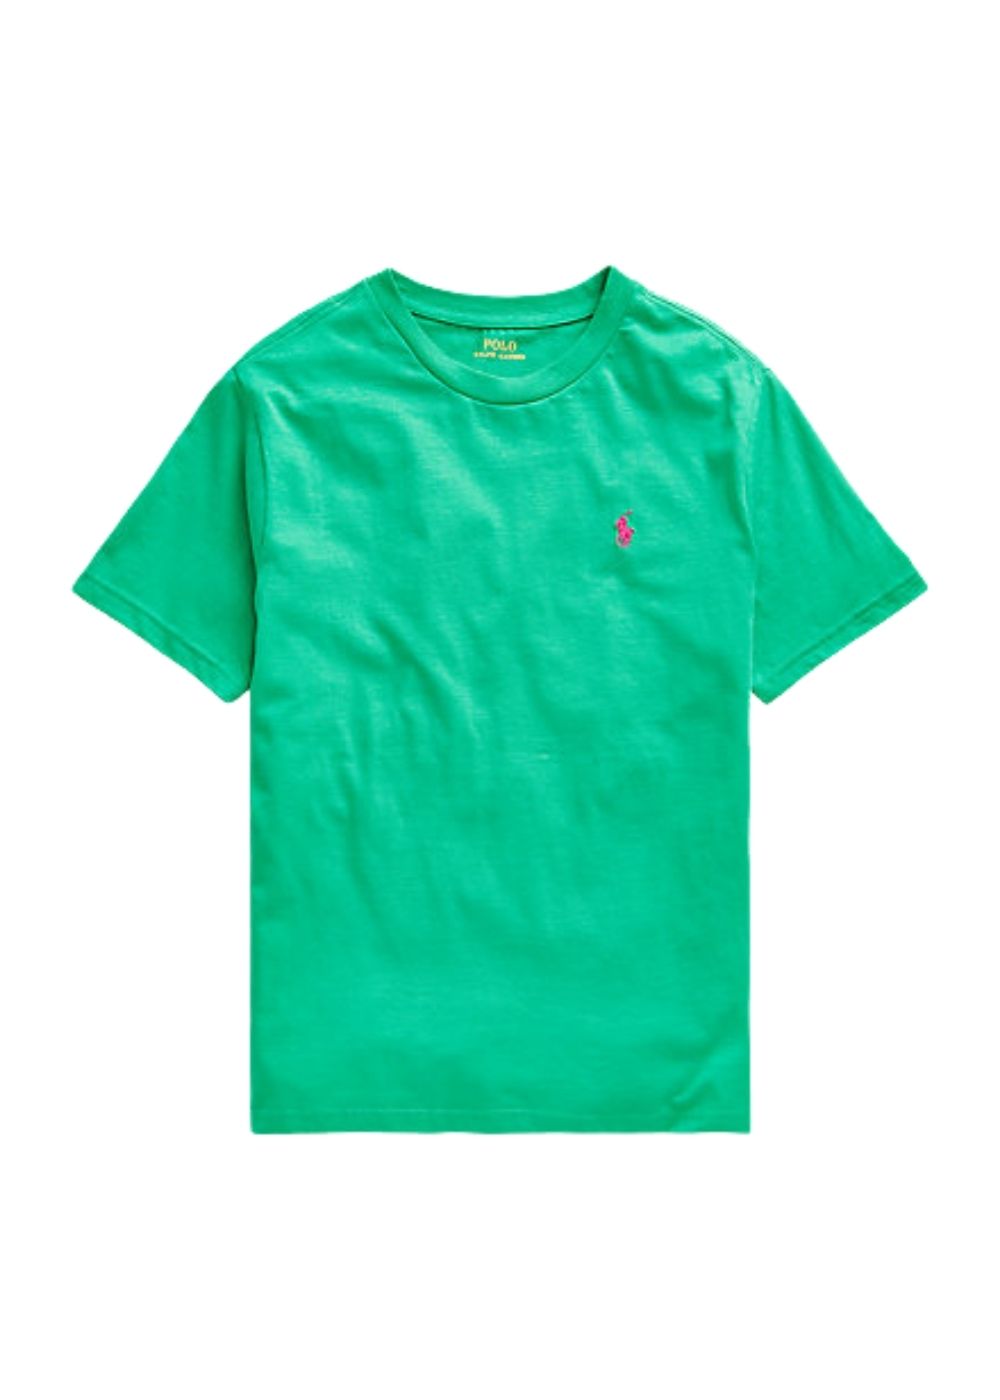 Featured image for “POLO RALPH LAUREN T-SHIRT COTONE”